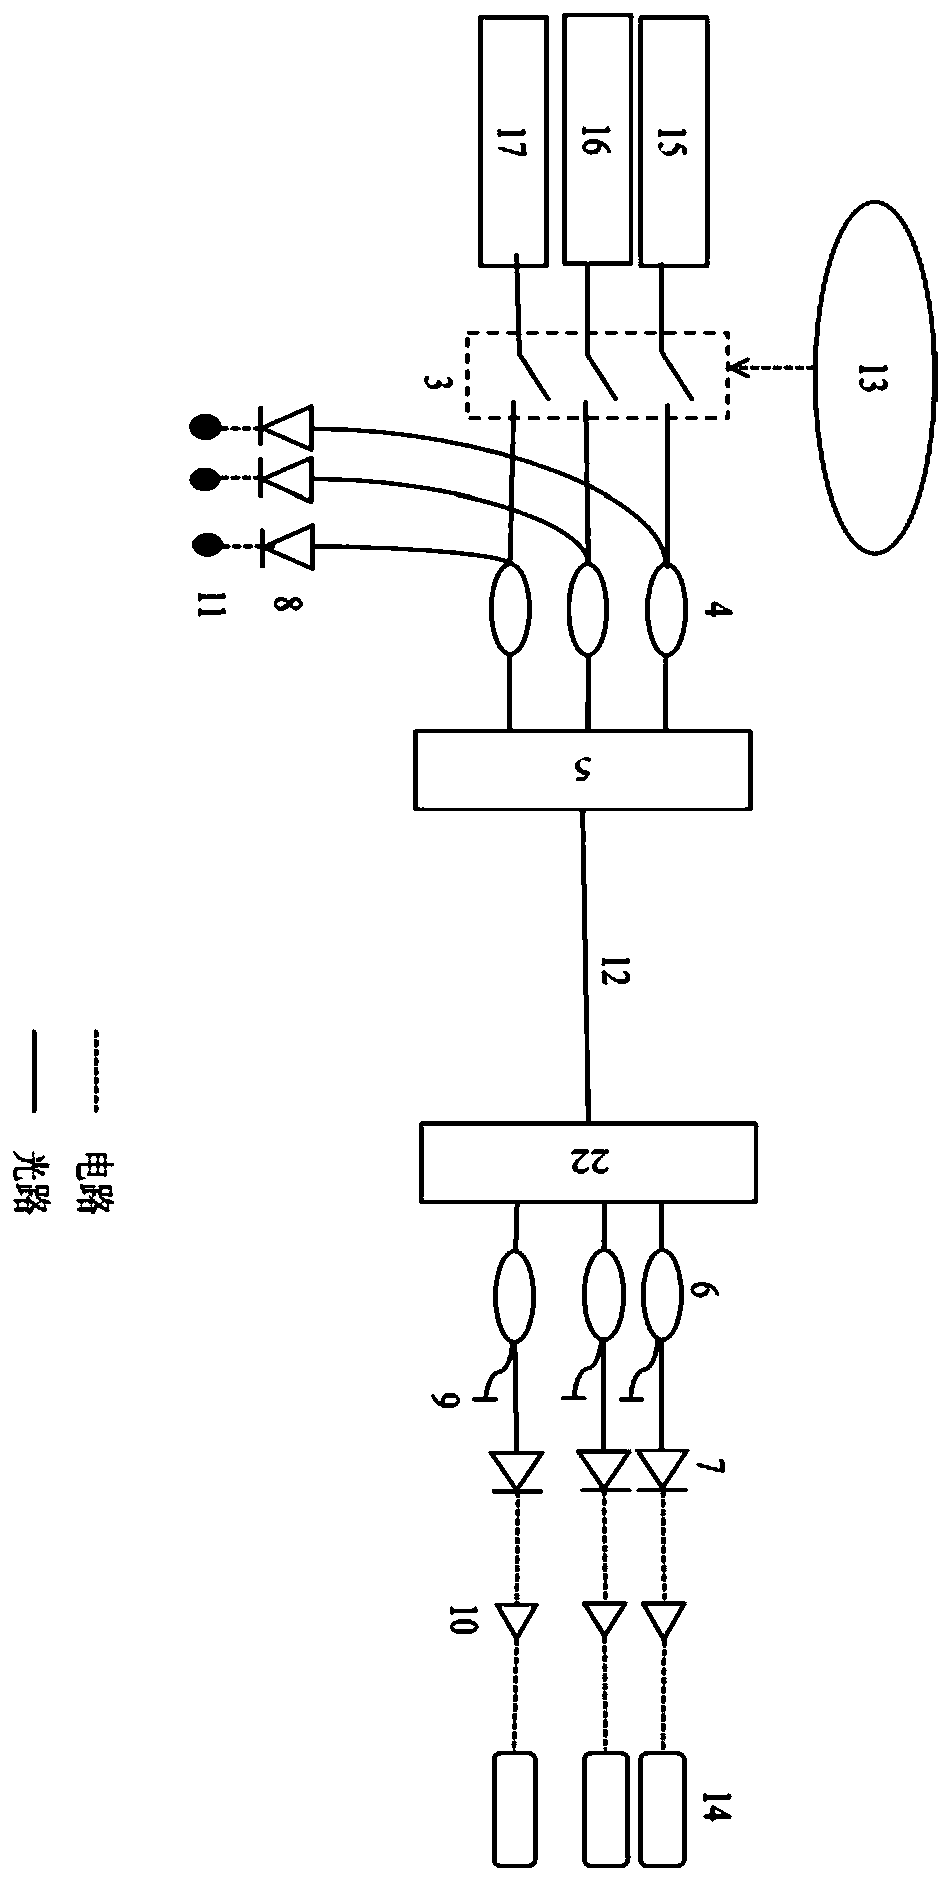 Switching value signal transmission control system based on an optical fiber